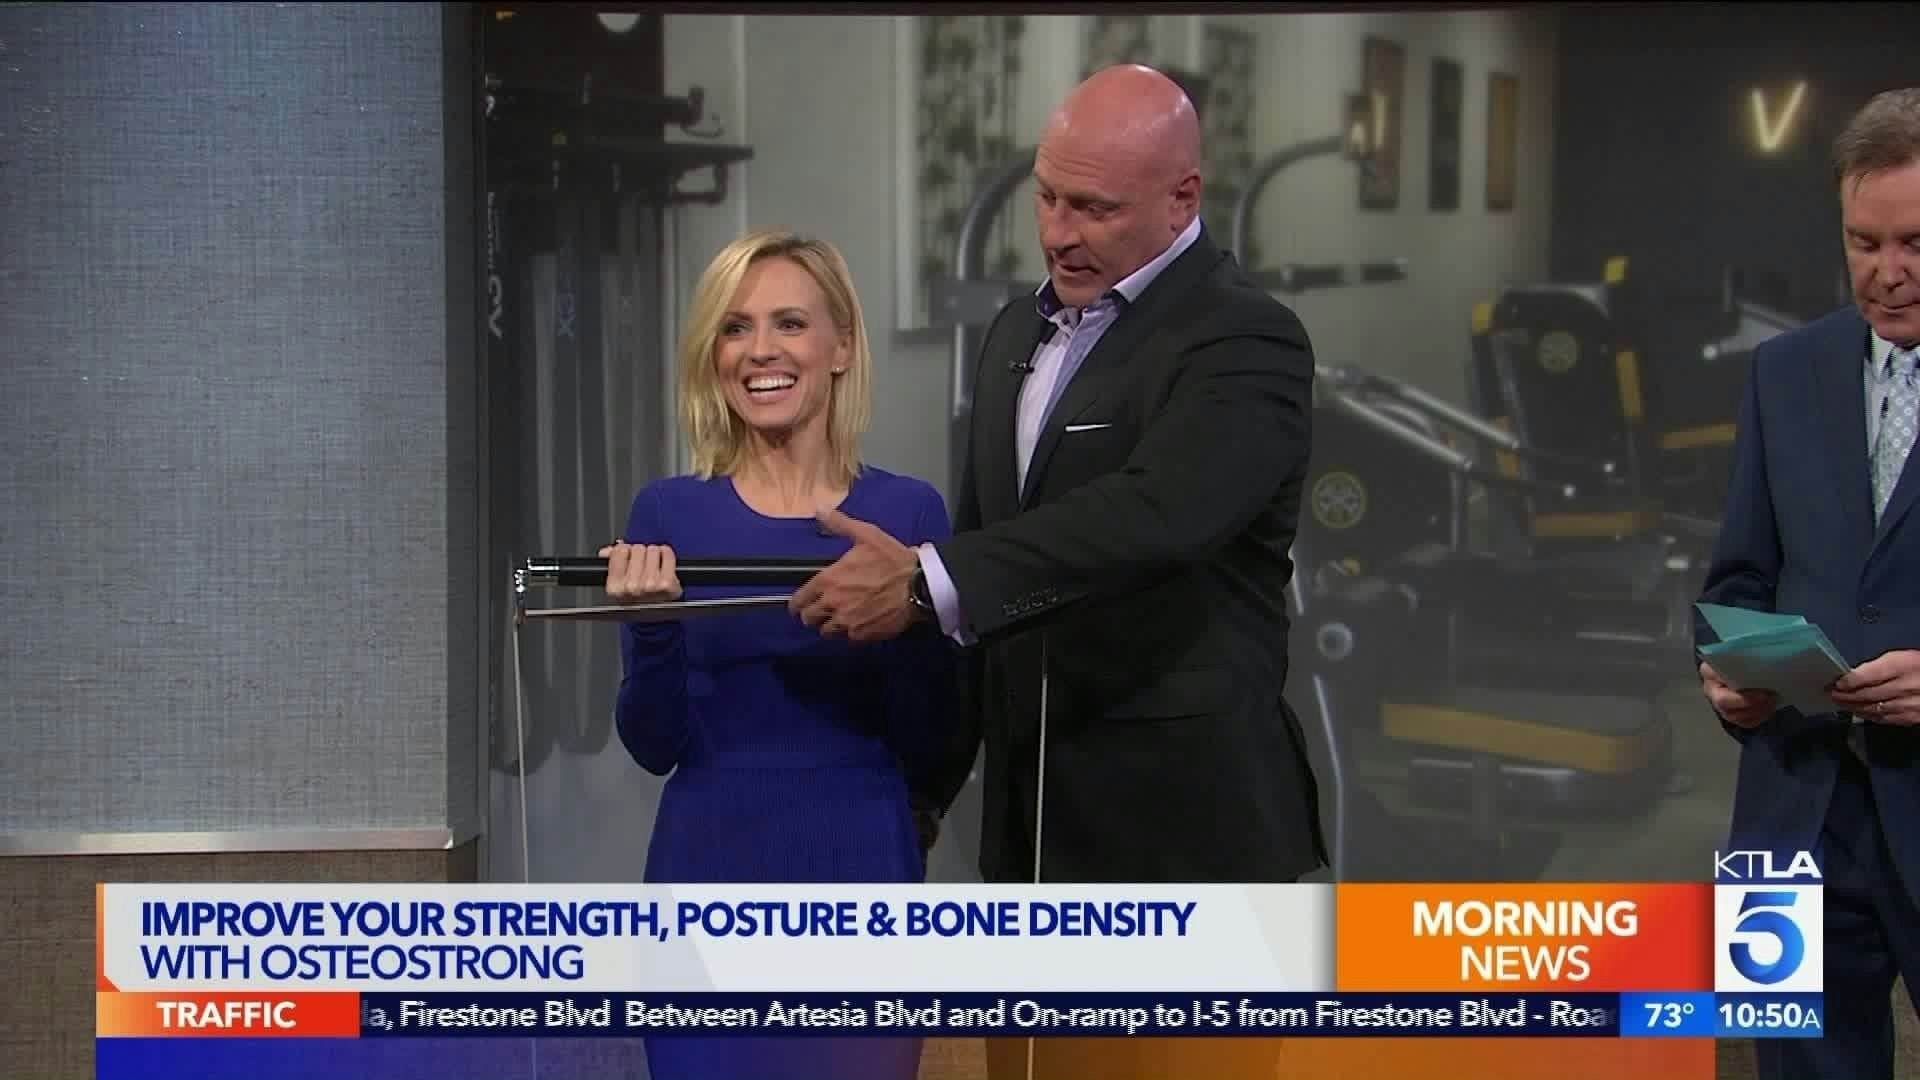 Dr. John Jaquish Talks Improving Your Strength, Posture and Bone Density With Osteostrong